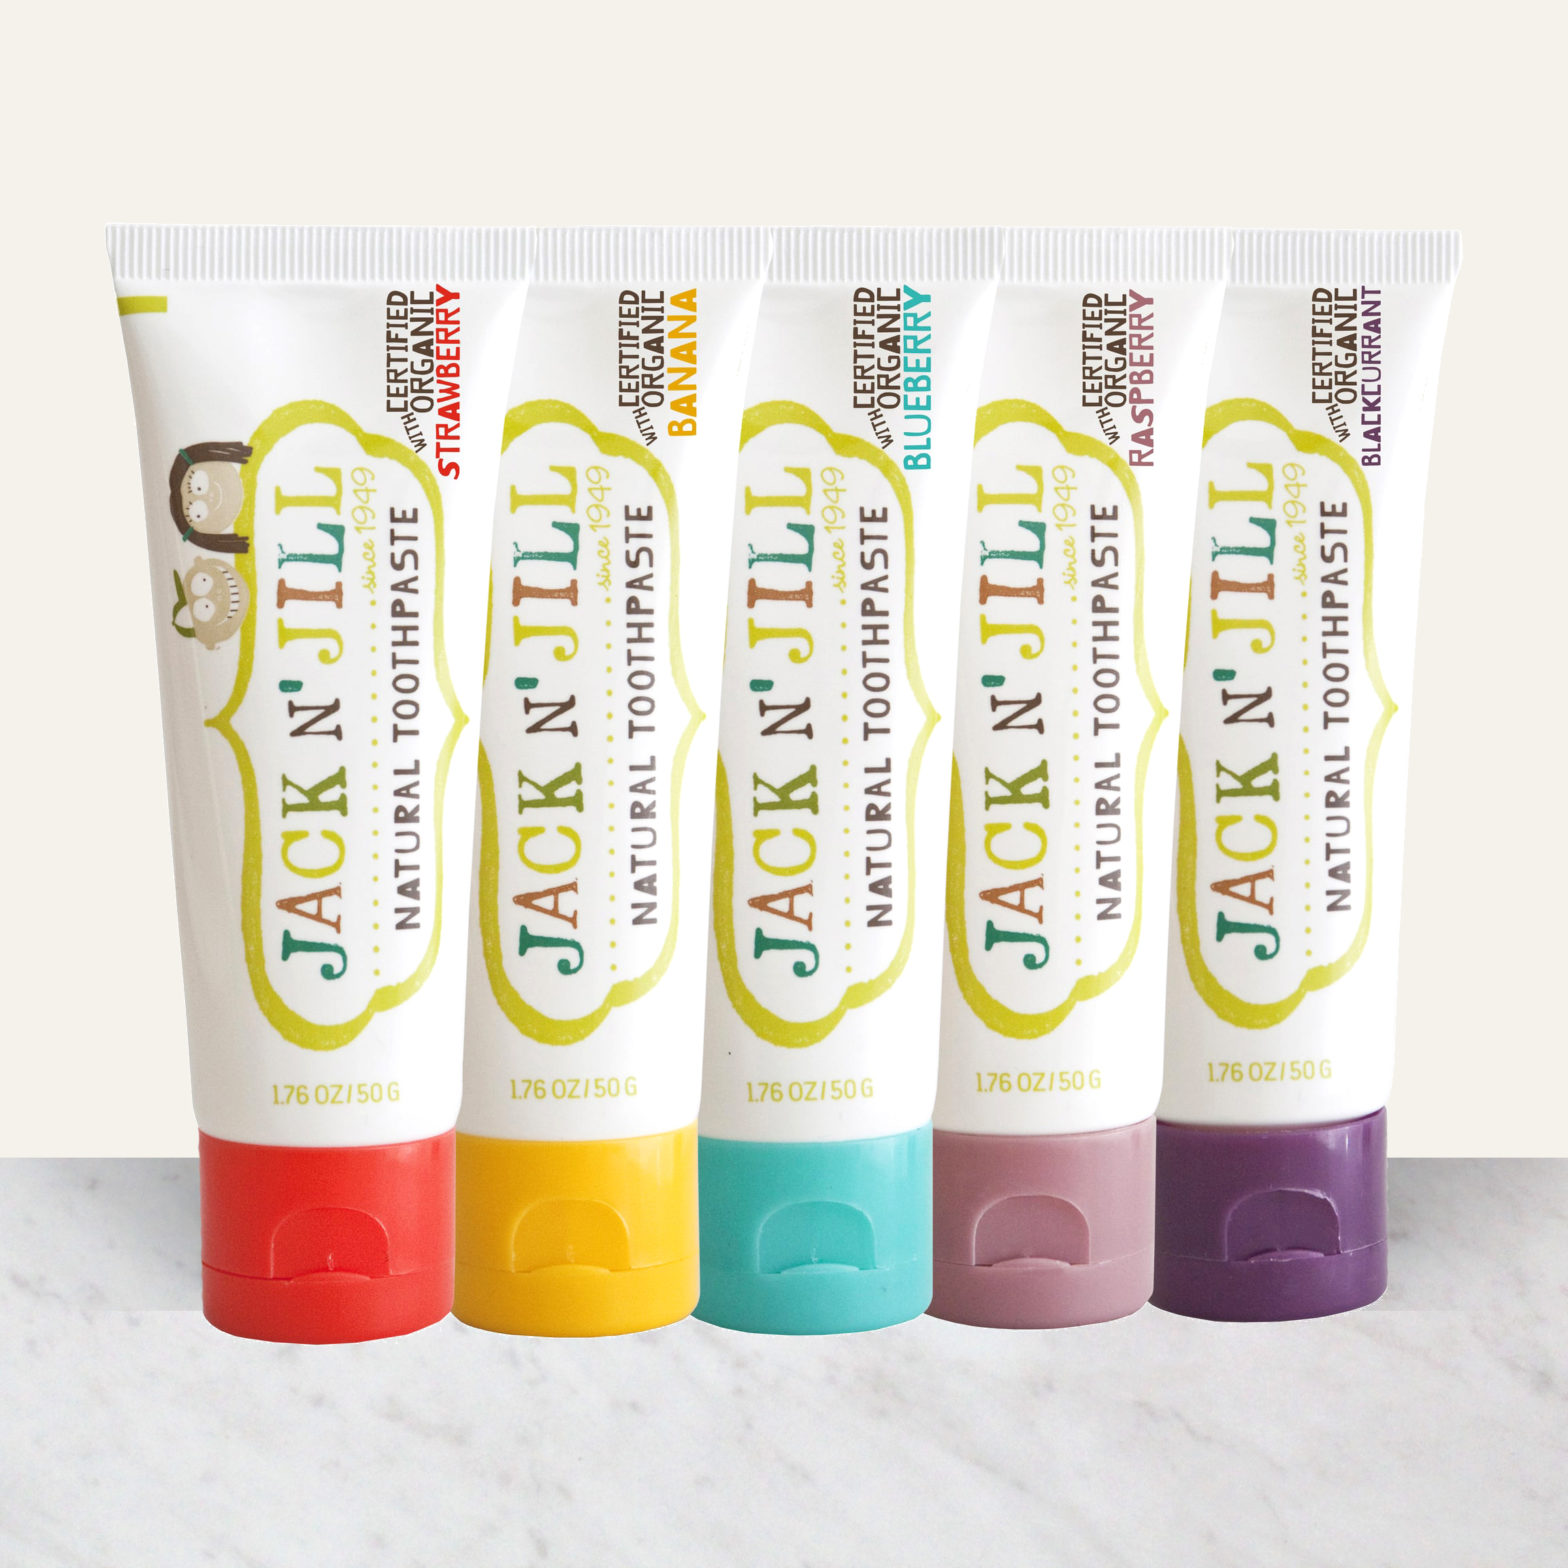 Clean Toothpaste Giveaway! - Olive You Whole